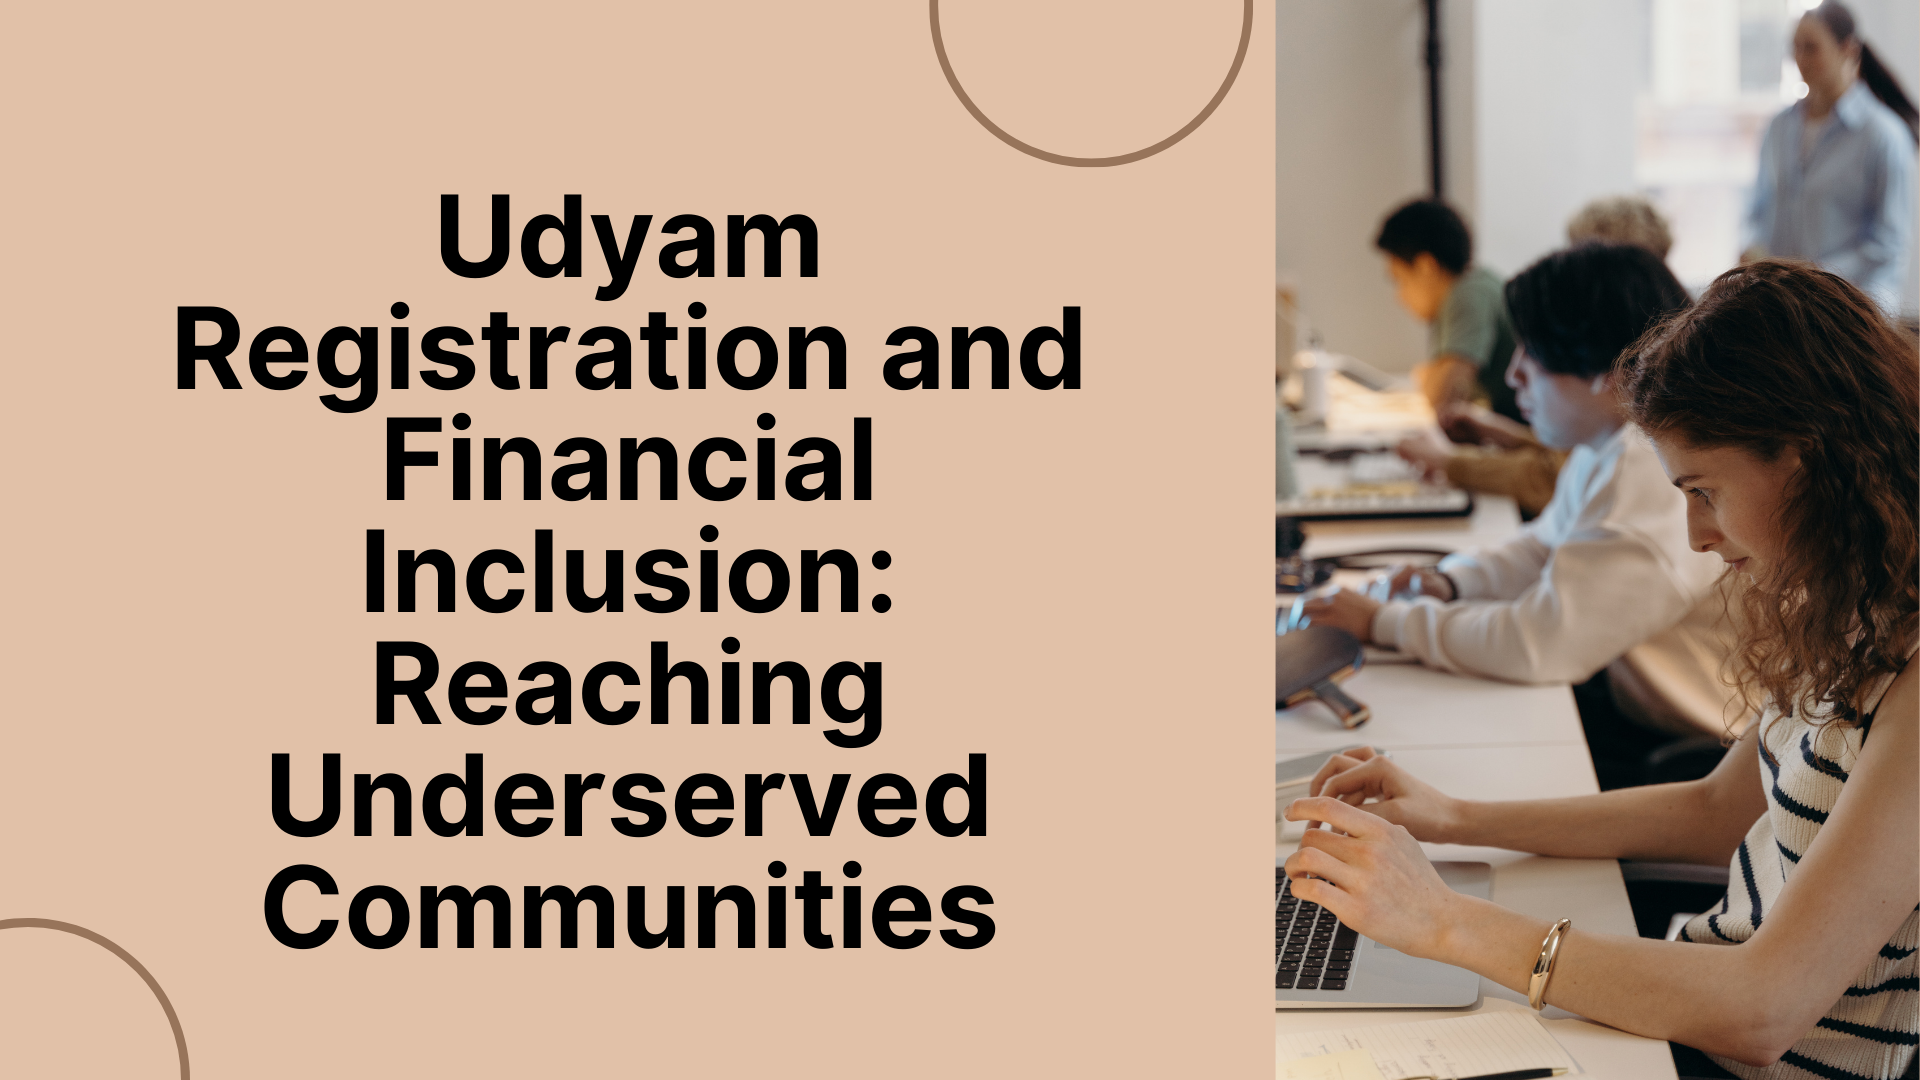 Udyam Registration and Financial Inclusion Reaching Underserved Communities